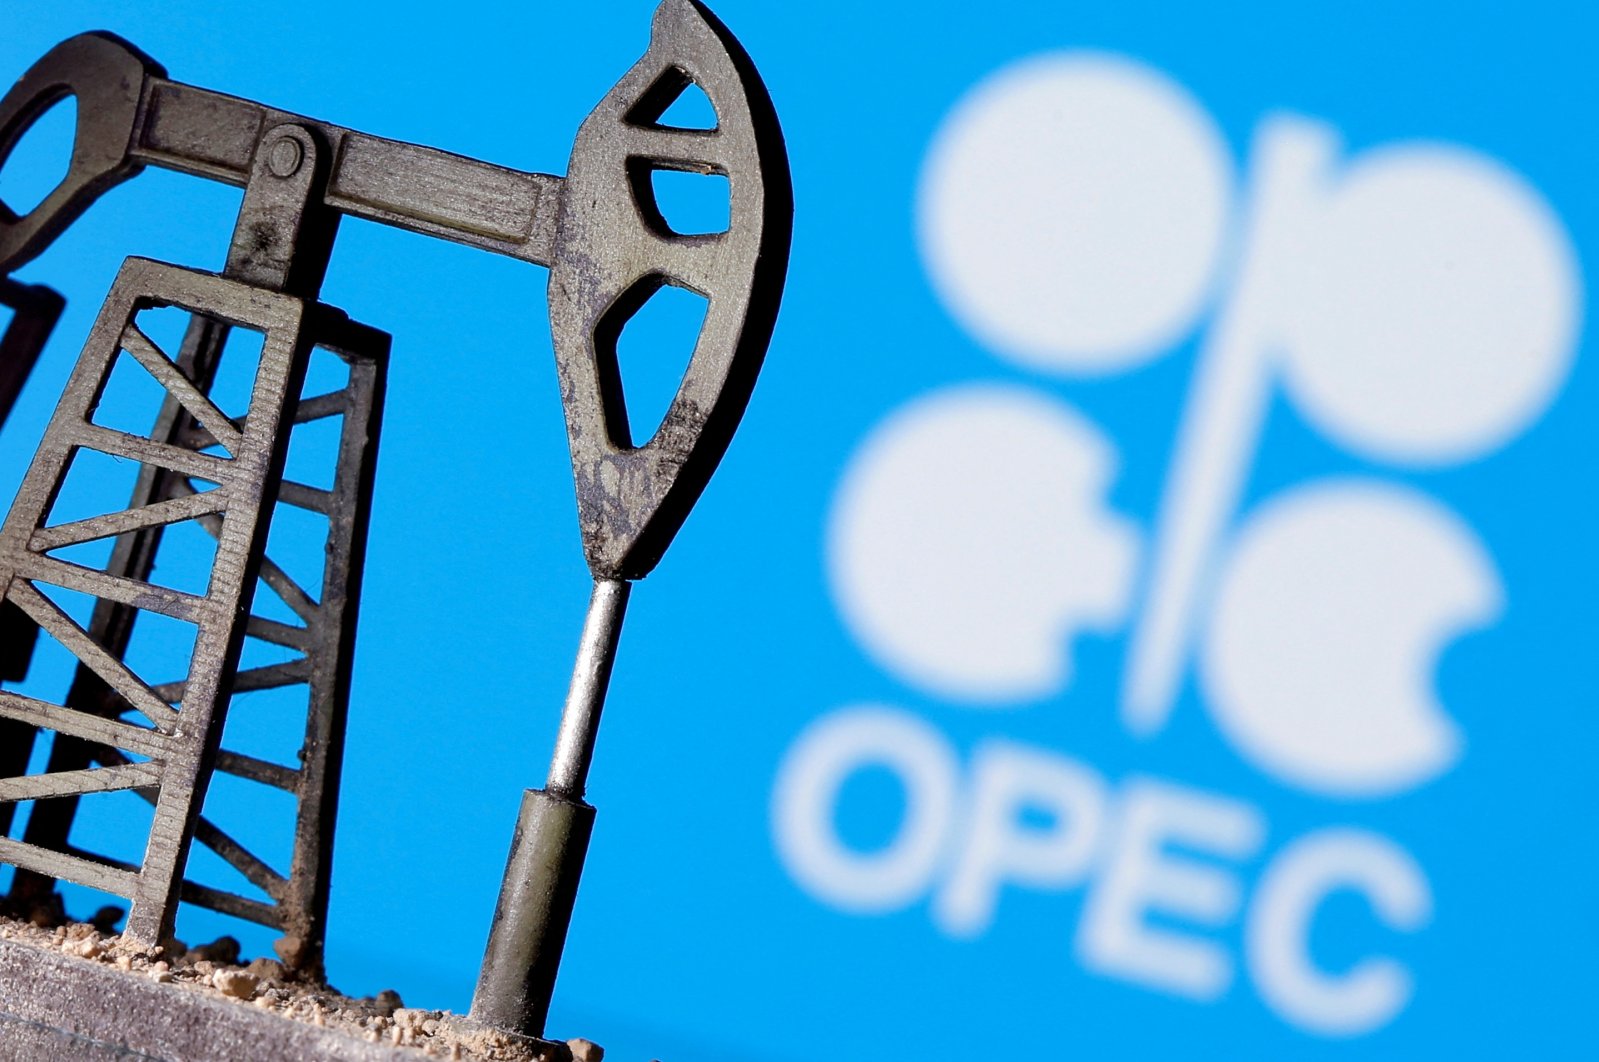 A 3D printed oil pump jack is seen in front of the OPEC logo in this illustration, April 14, 2020. (Reuters Photo)